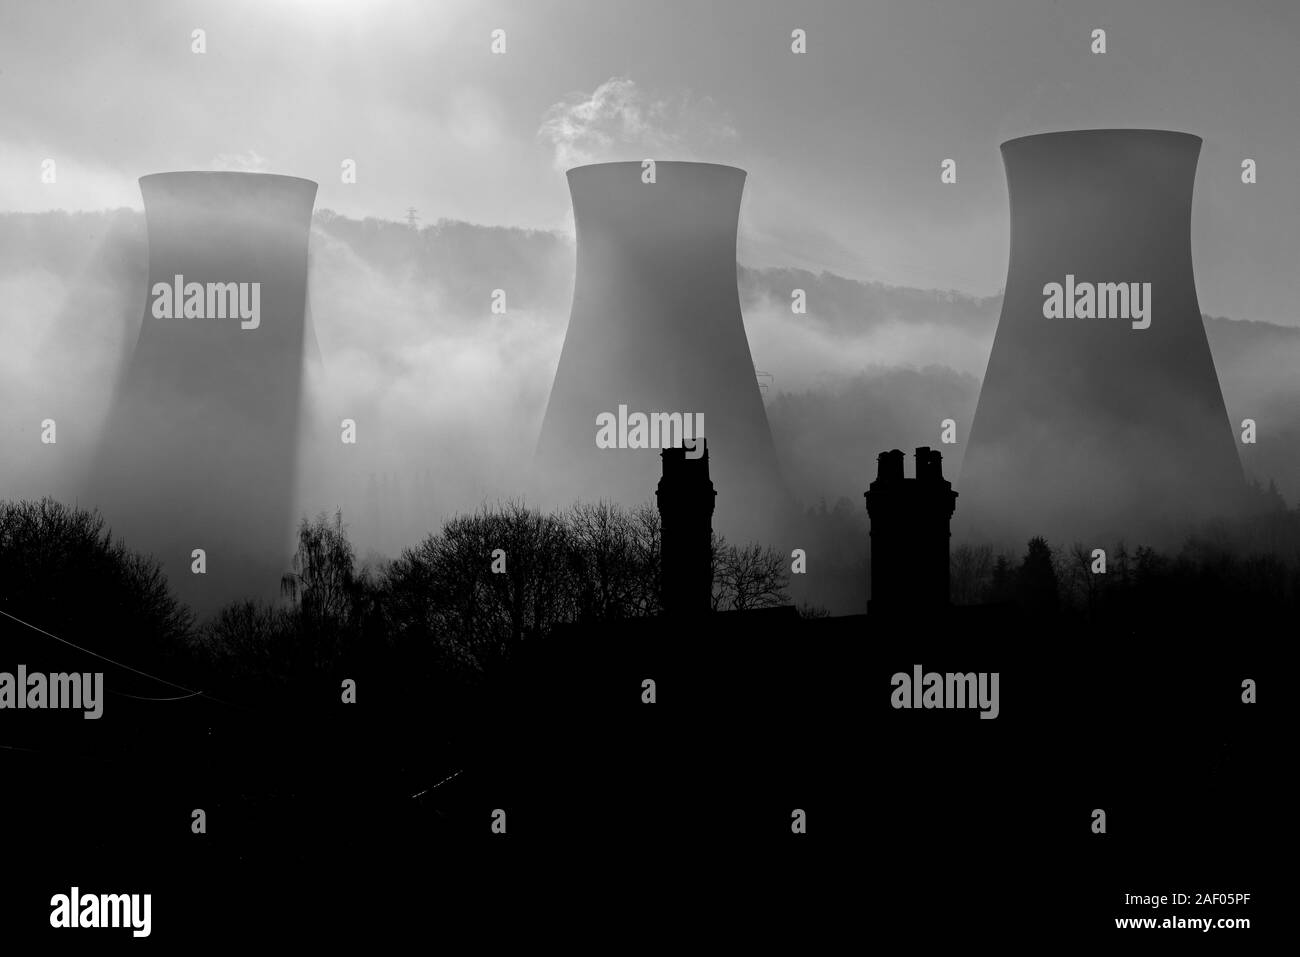 Ironbridge Power Station cooling towers 2019 Picture by David Bagnall, Stock Photo